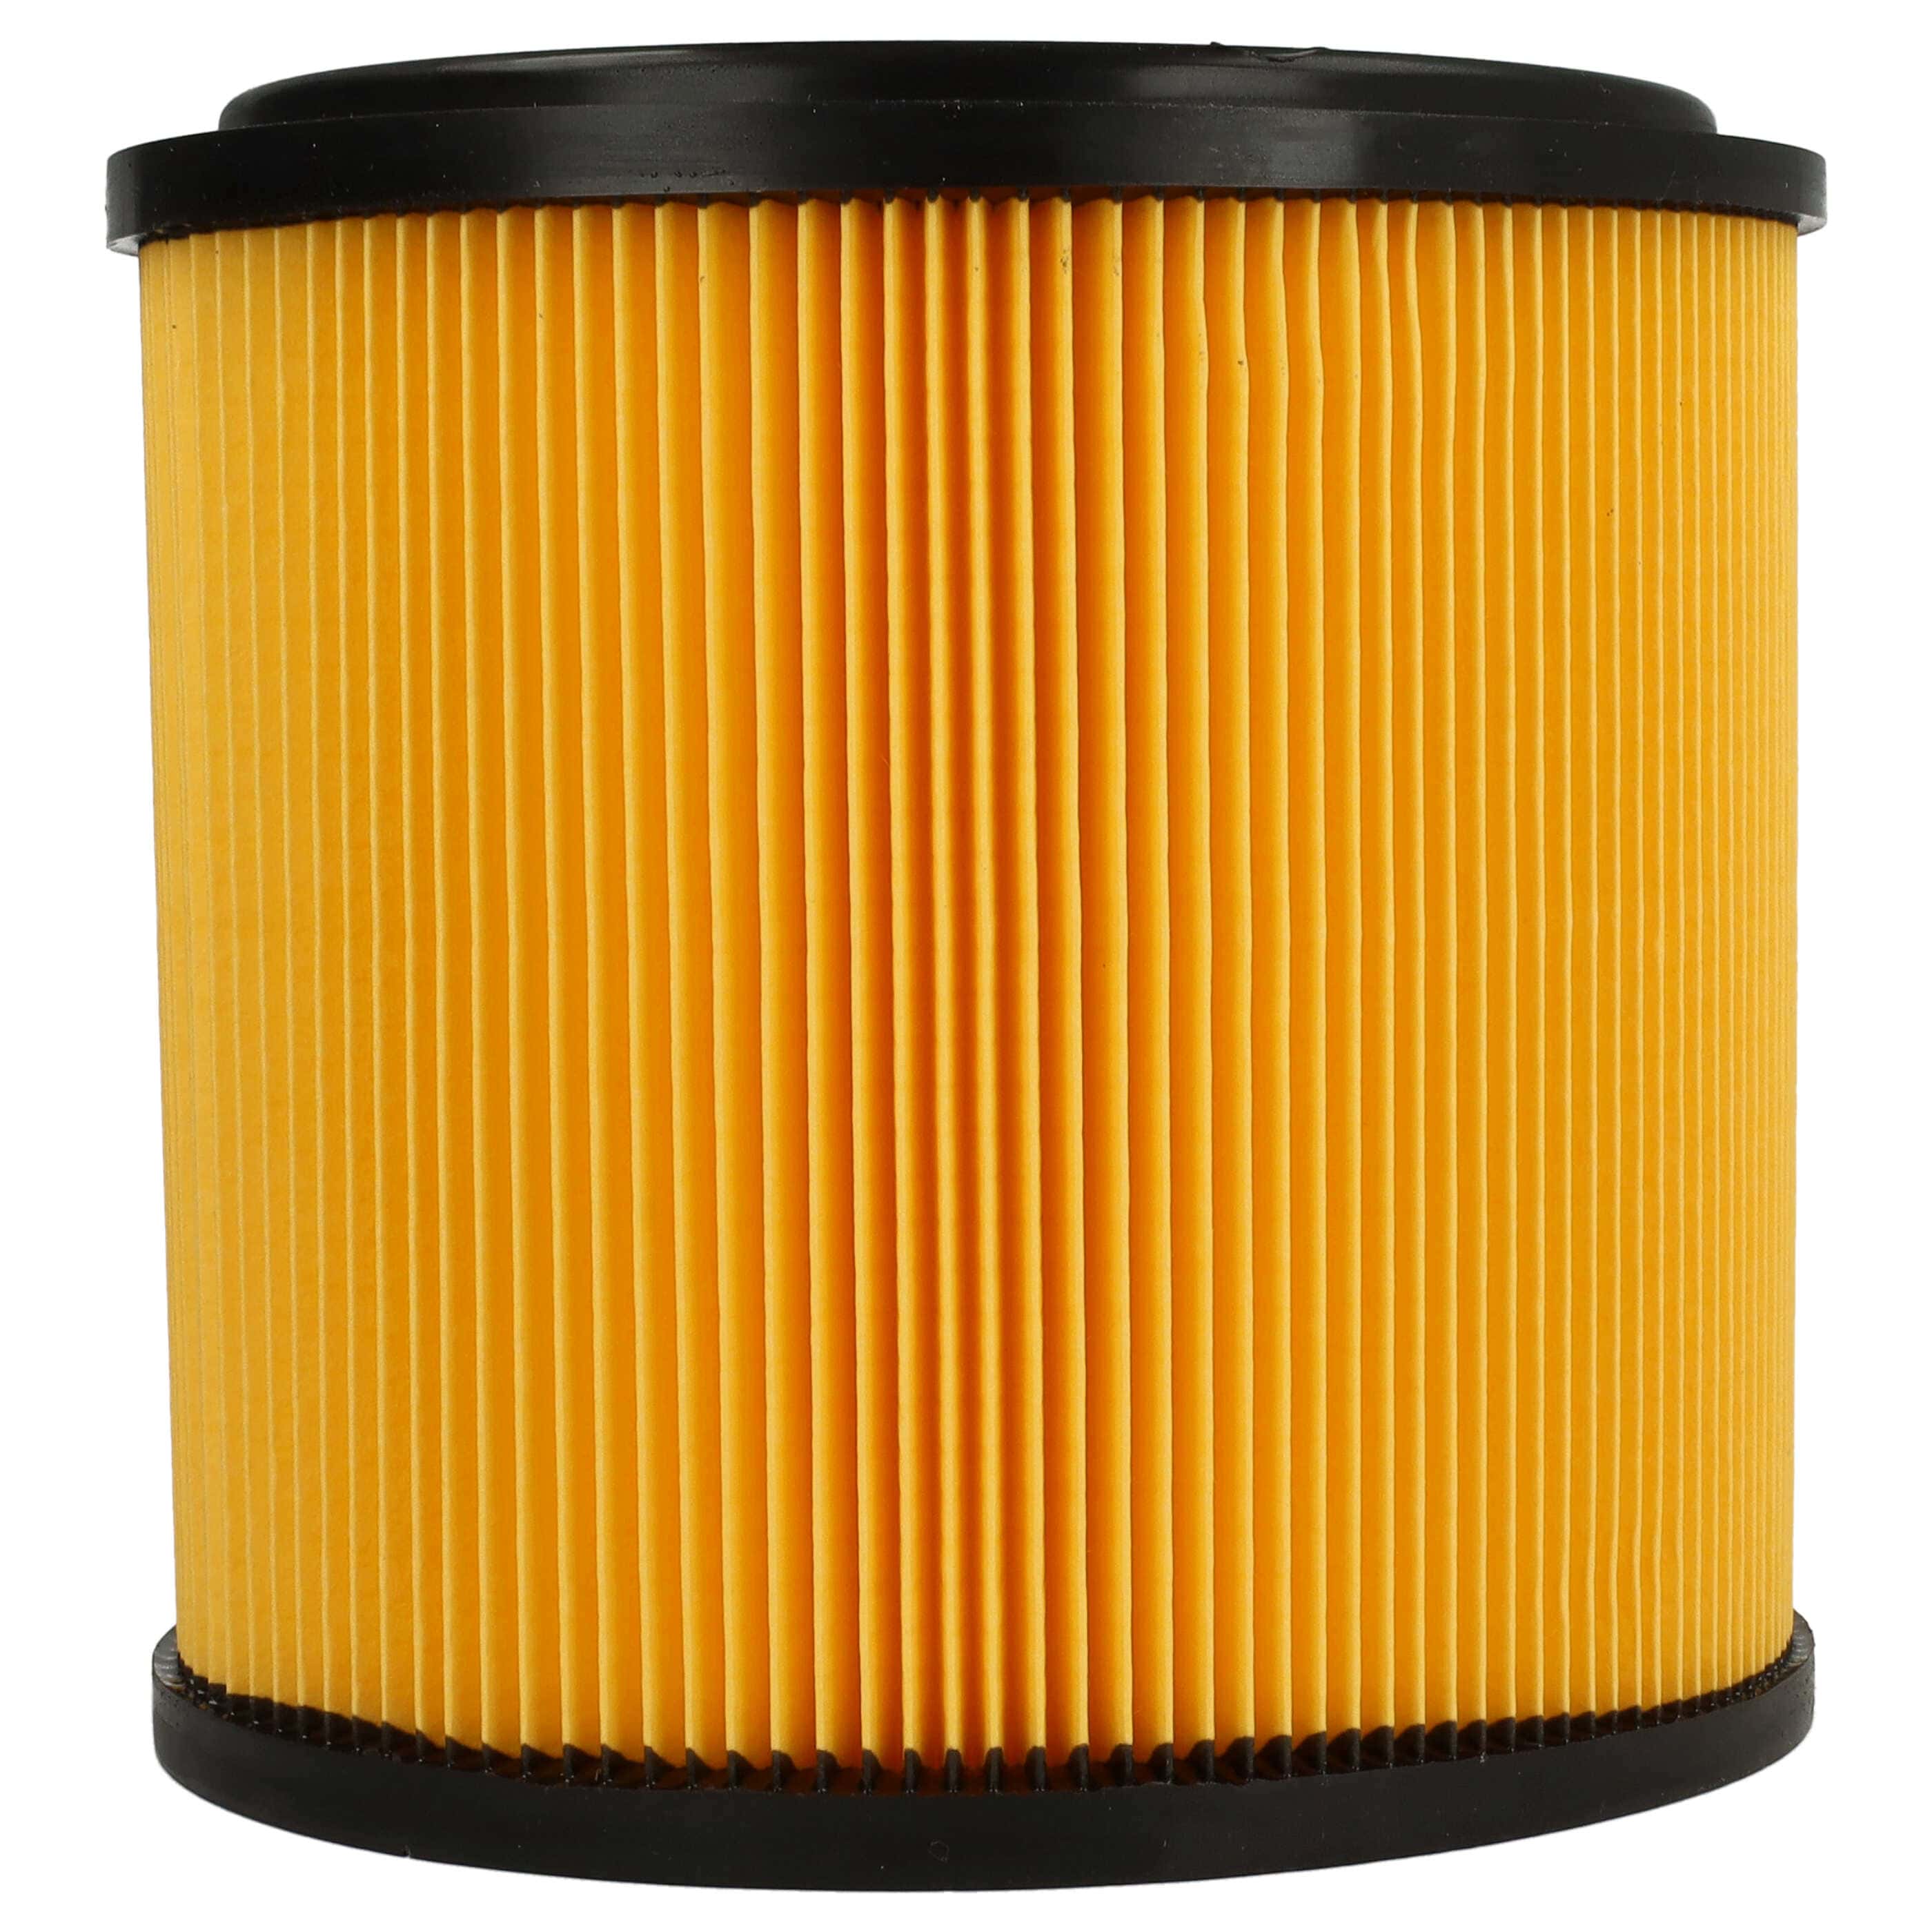 1x cartridge filter replaces Grizzly 91092030 for Aqua VacVacuum Cleaner, black / yellow